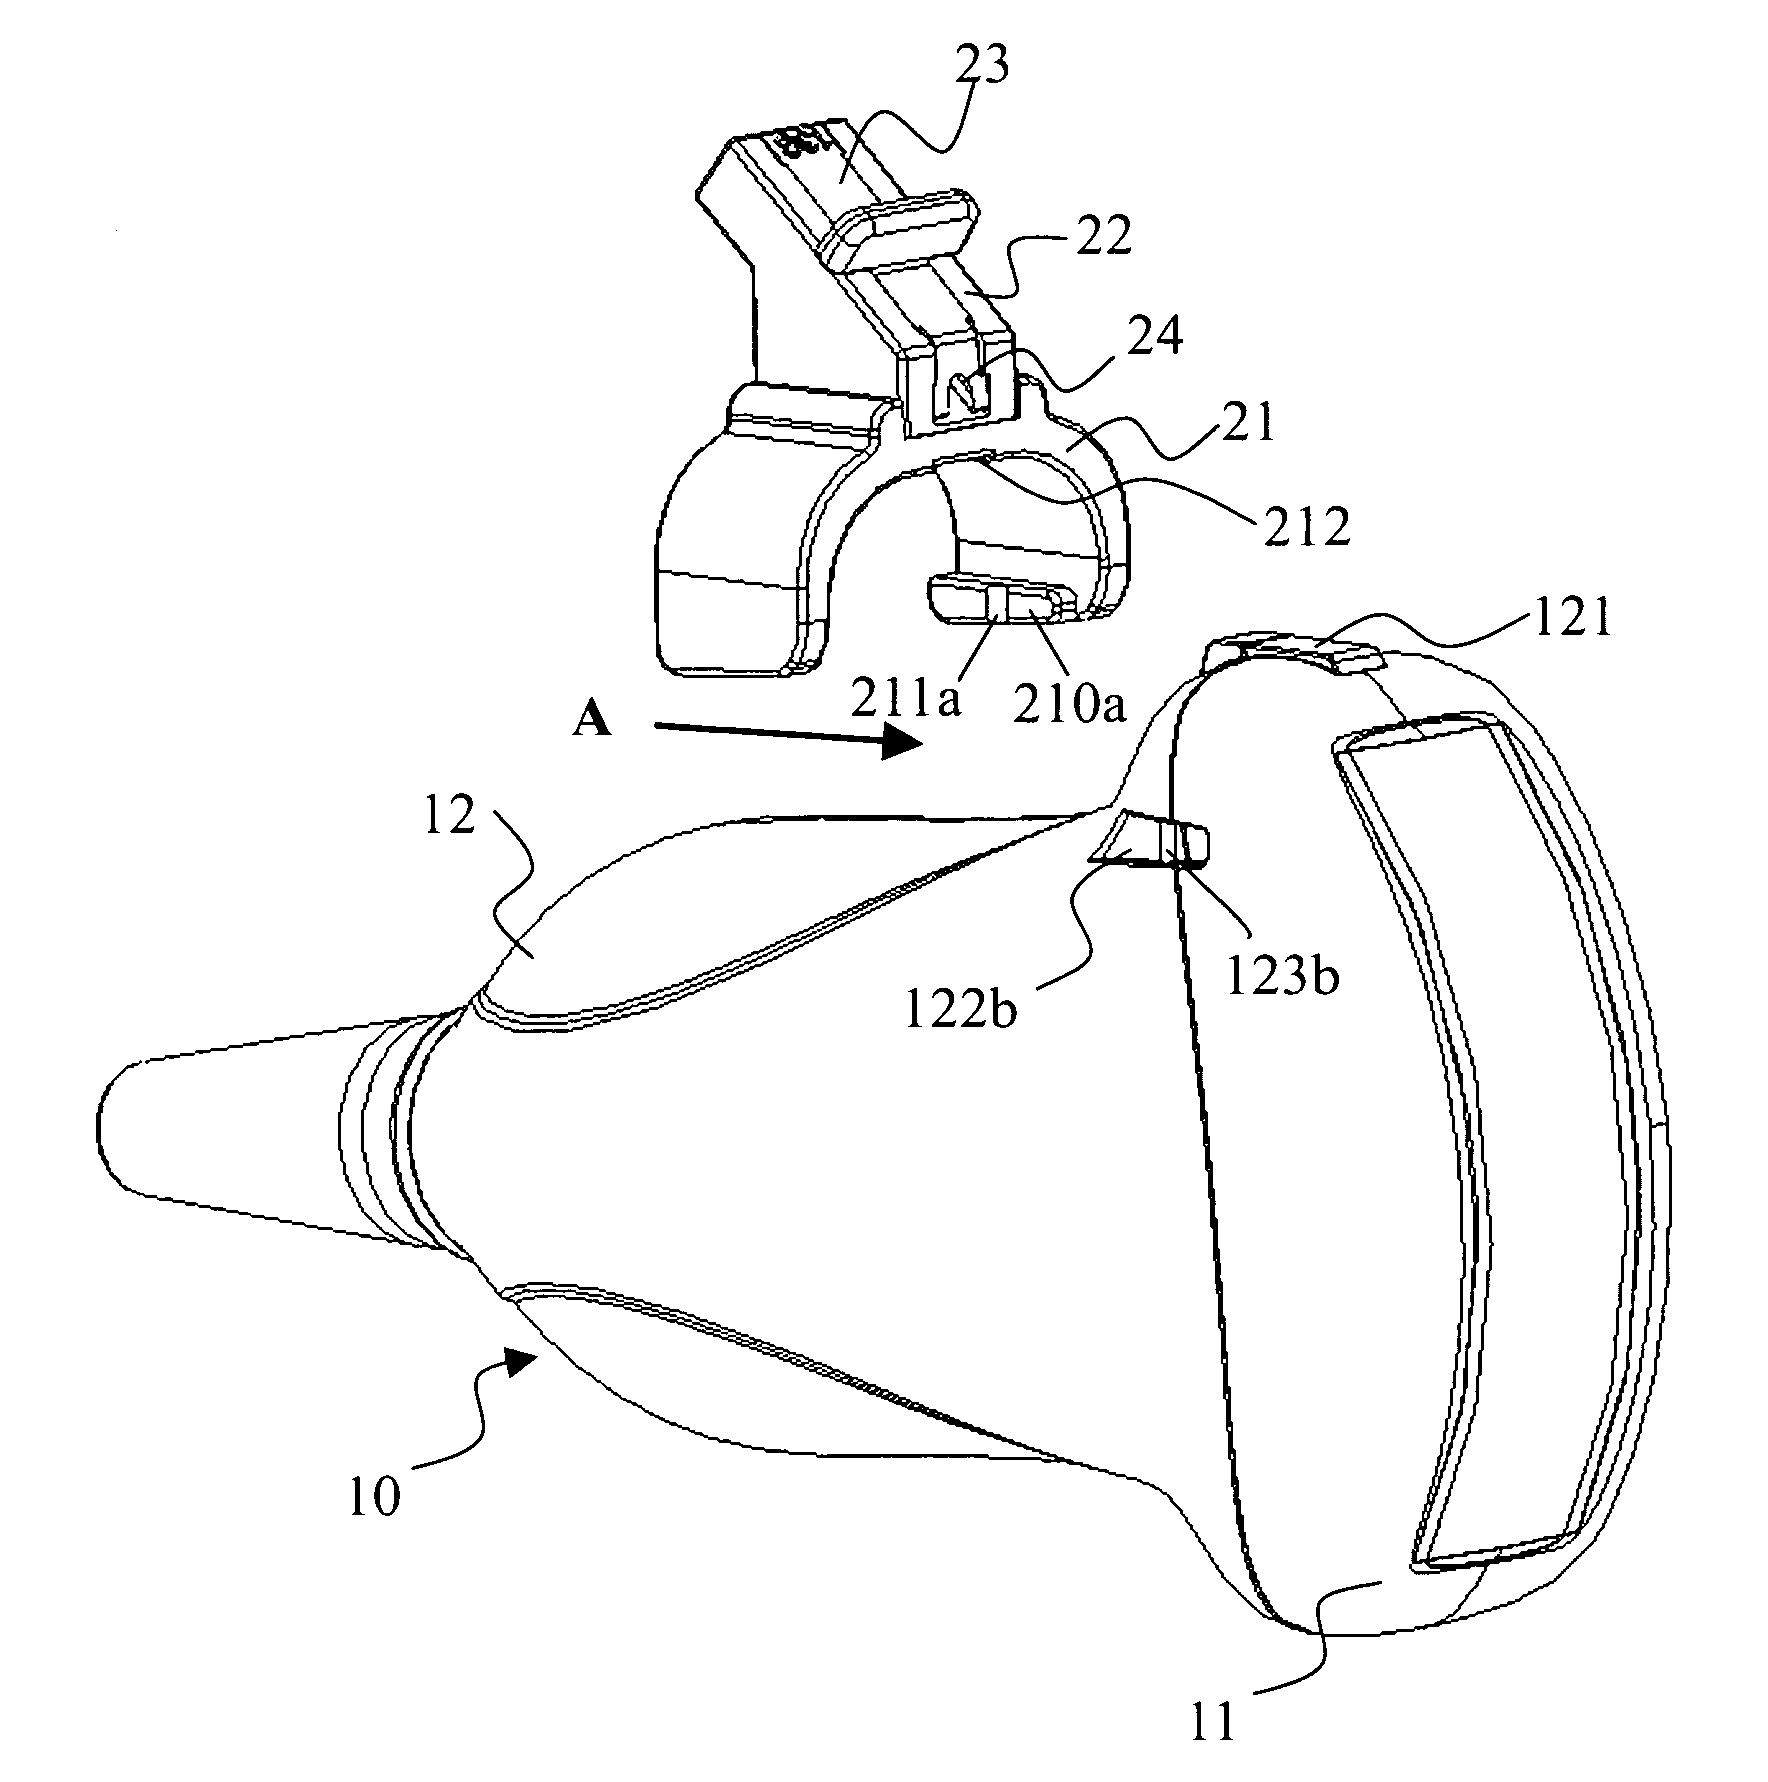 Structure for attaching needle guide to ultrasound probe